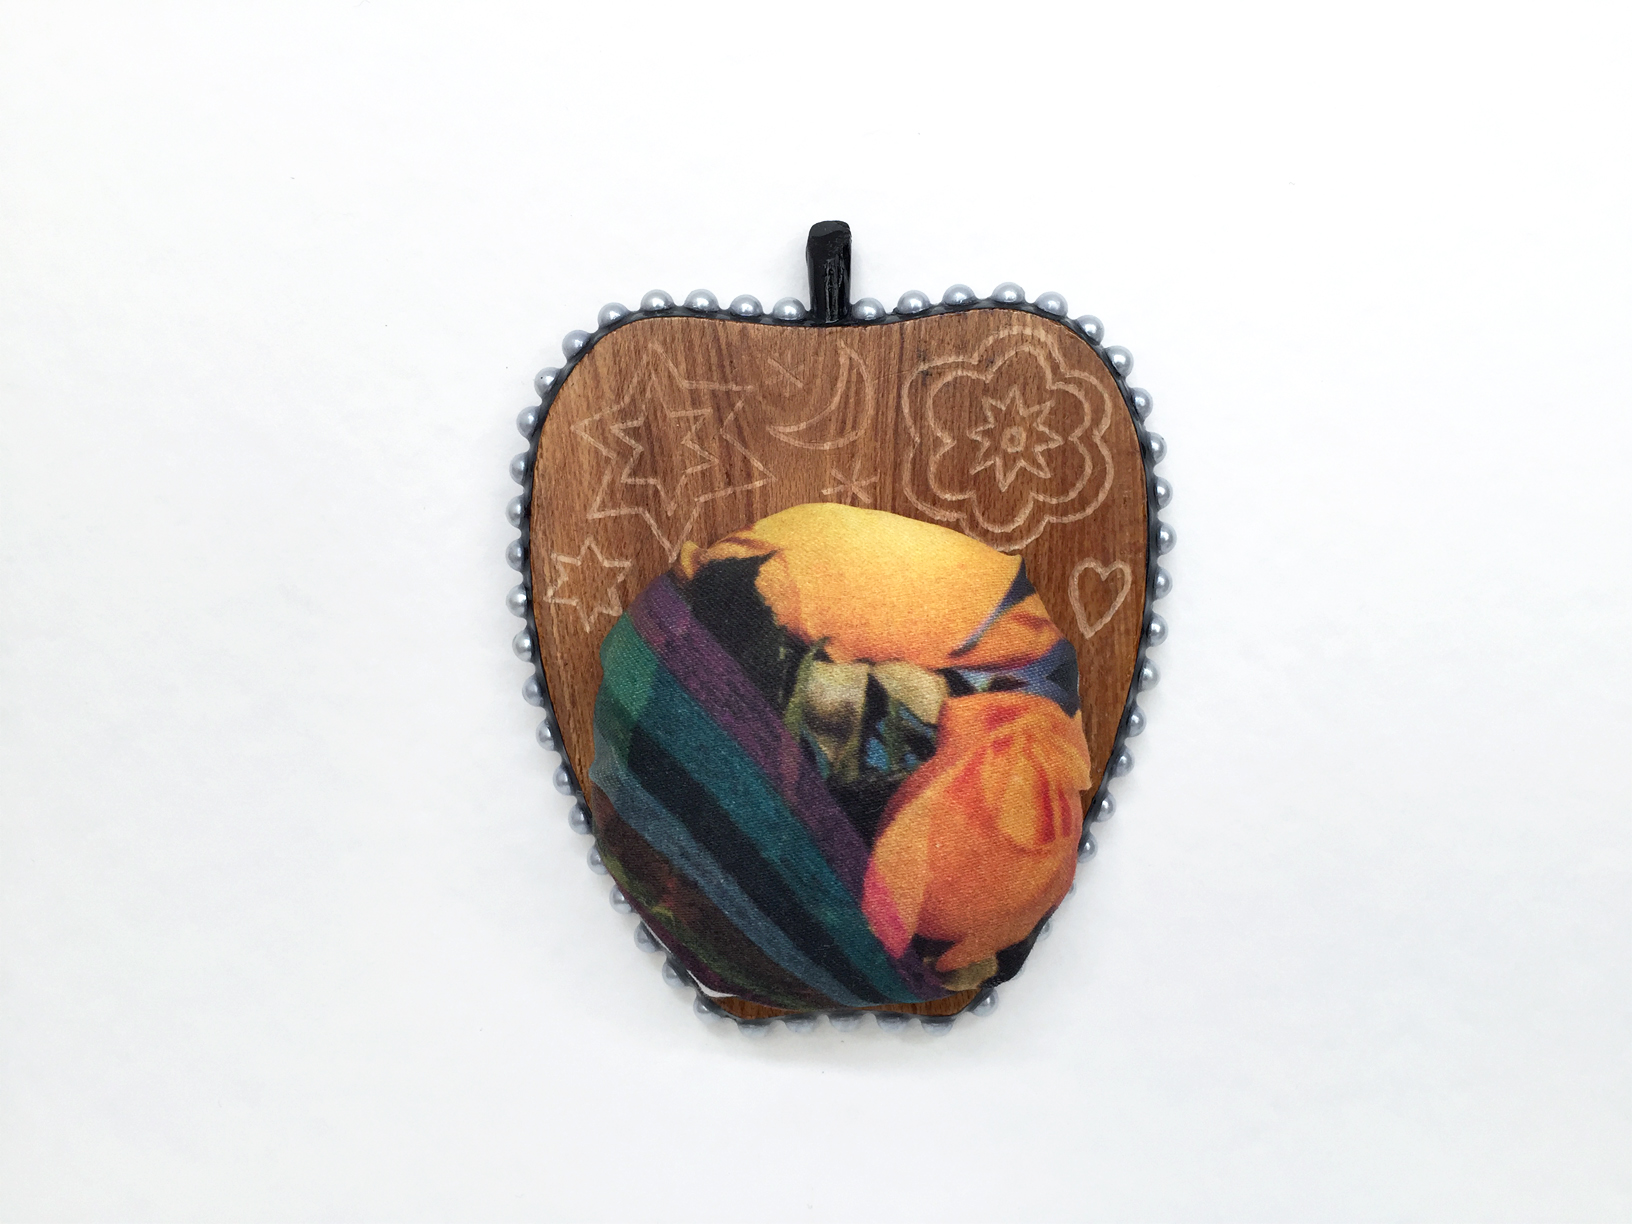 Apple Isle Pincushion #3, 2019, found wood coaster (engraved), handmade paper collage digitally printed on cotton sateen, plastic pearls, acrylic paint, resin, 120mm x 96mm